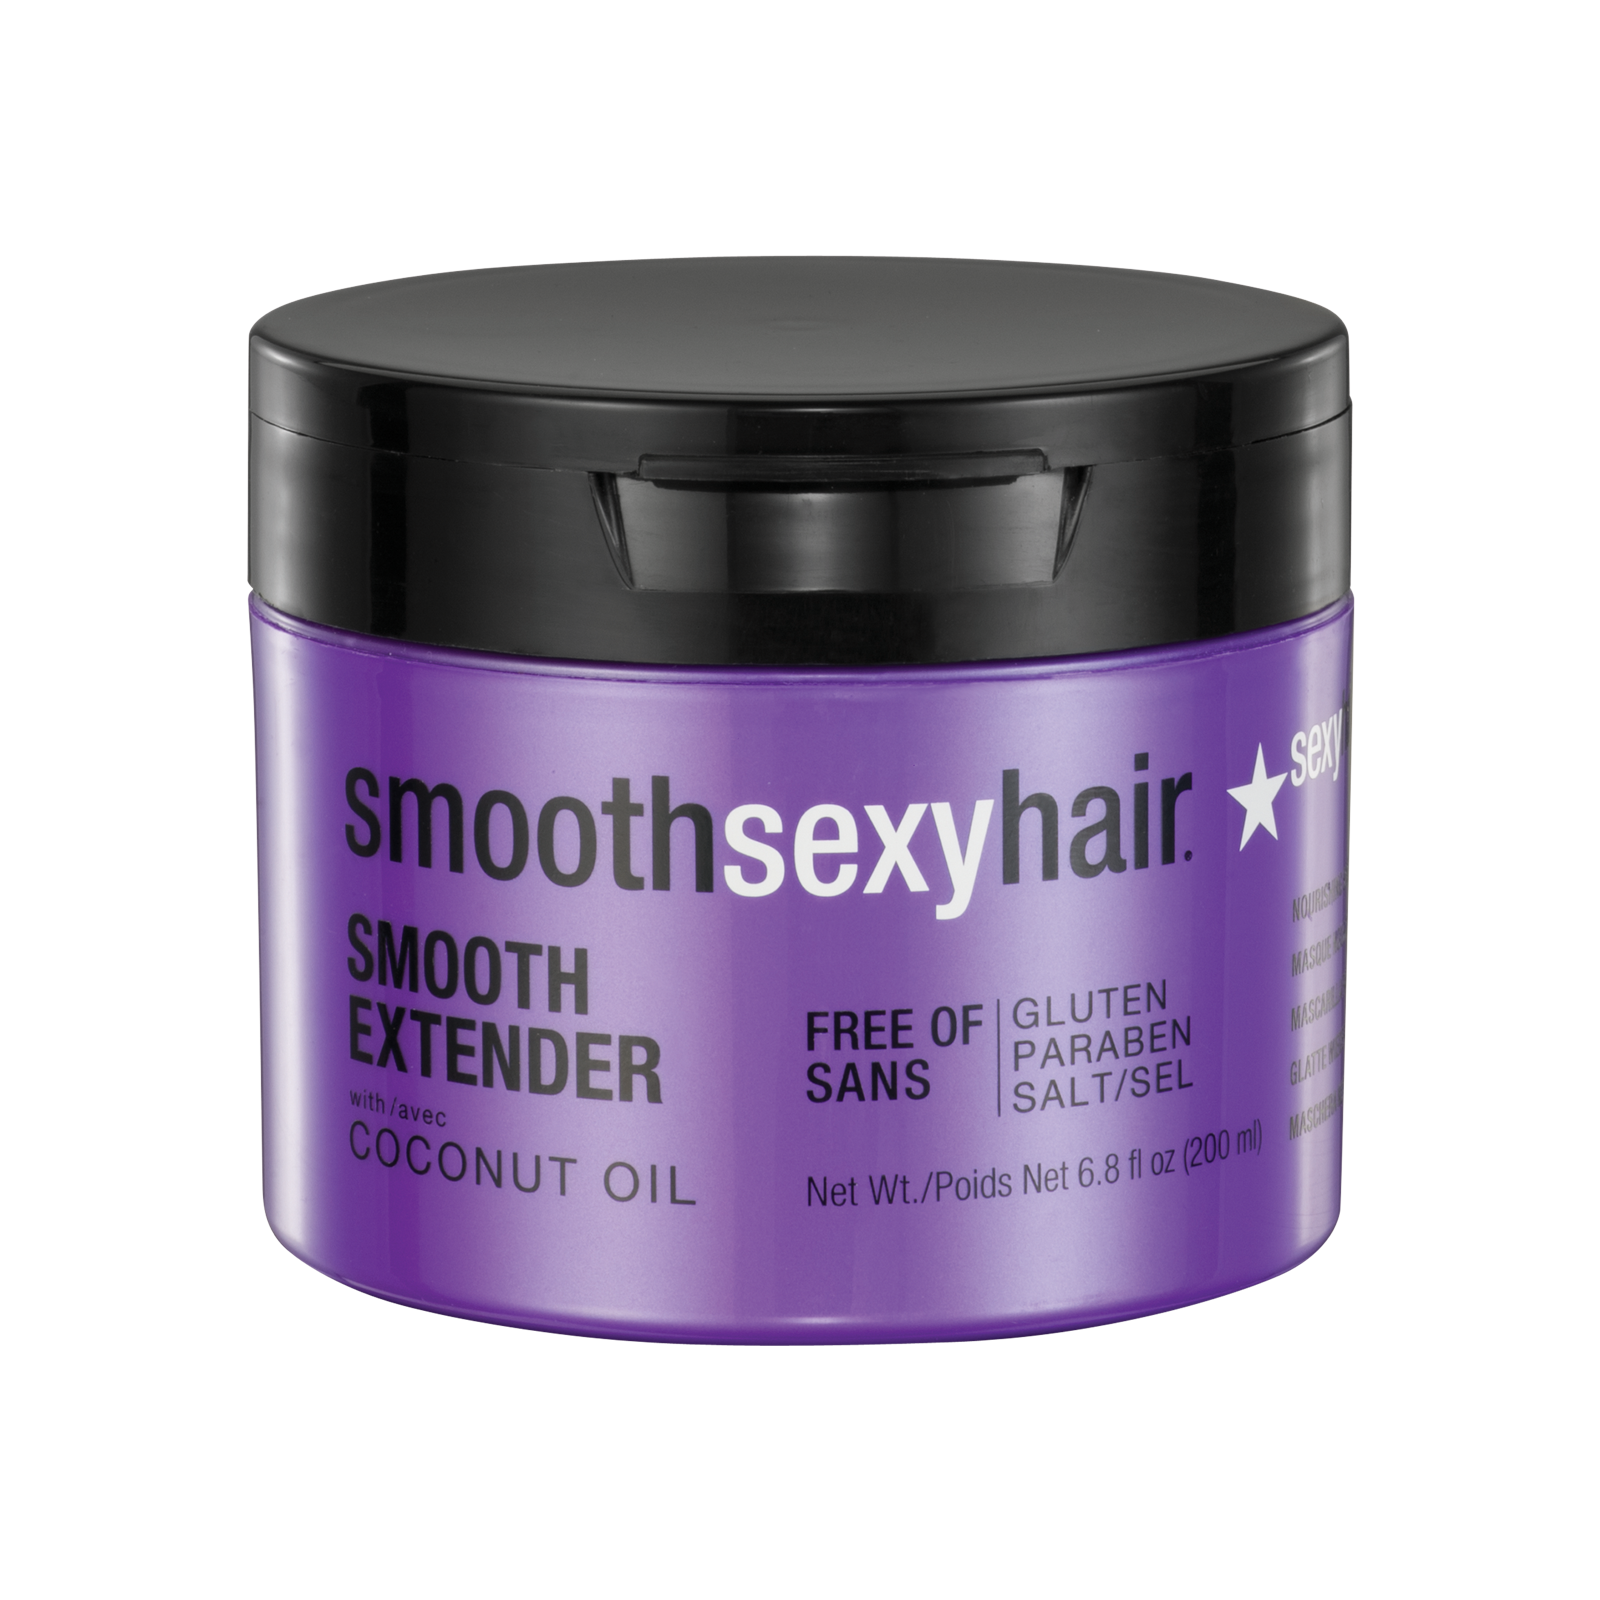 Smooth Sexy Hair - Smooth Extender Nourishing Masque - Sexy Hair Concepts |  CosmoProf